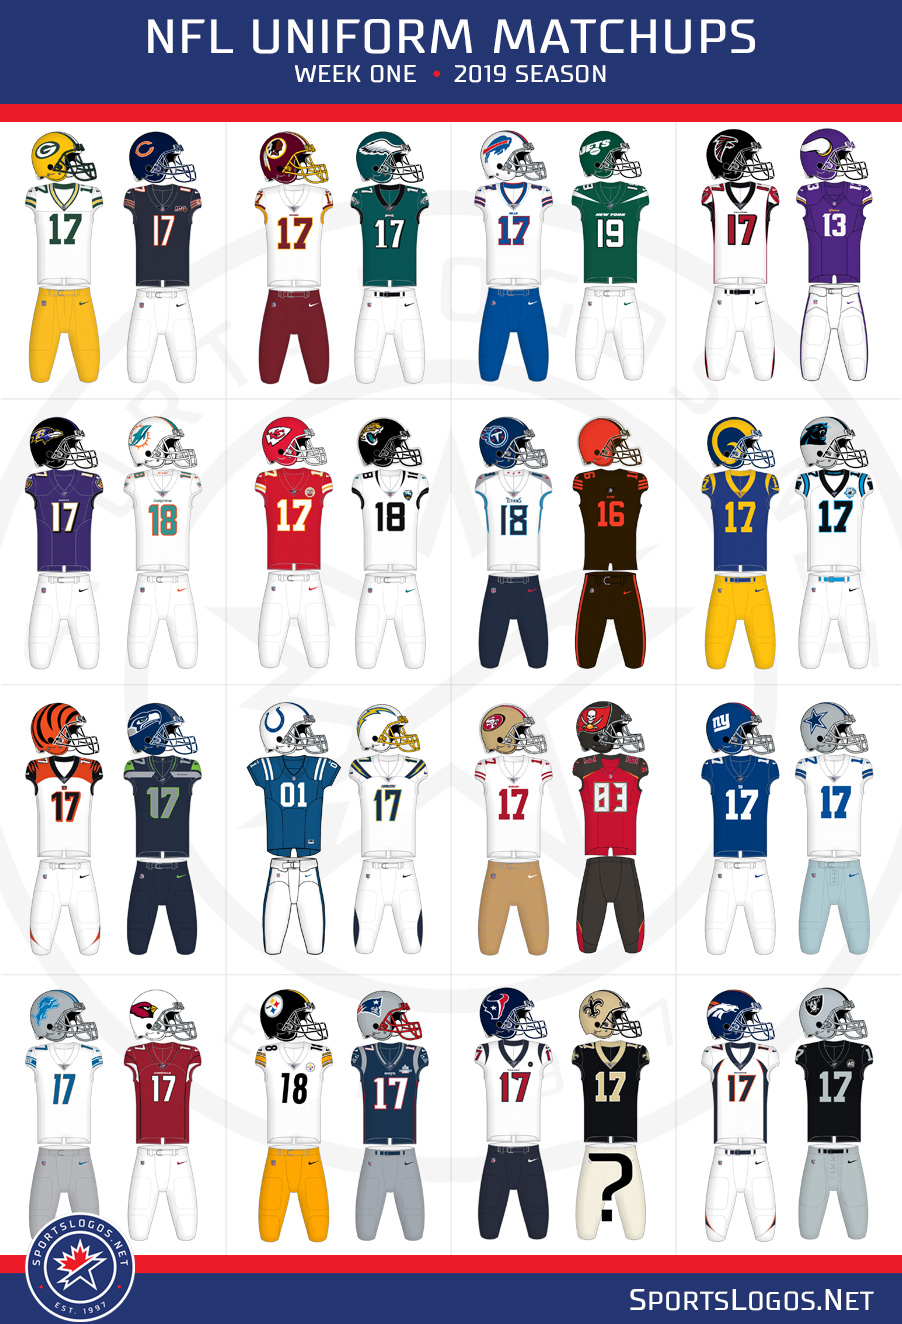 nfl jersey cost